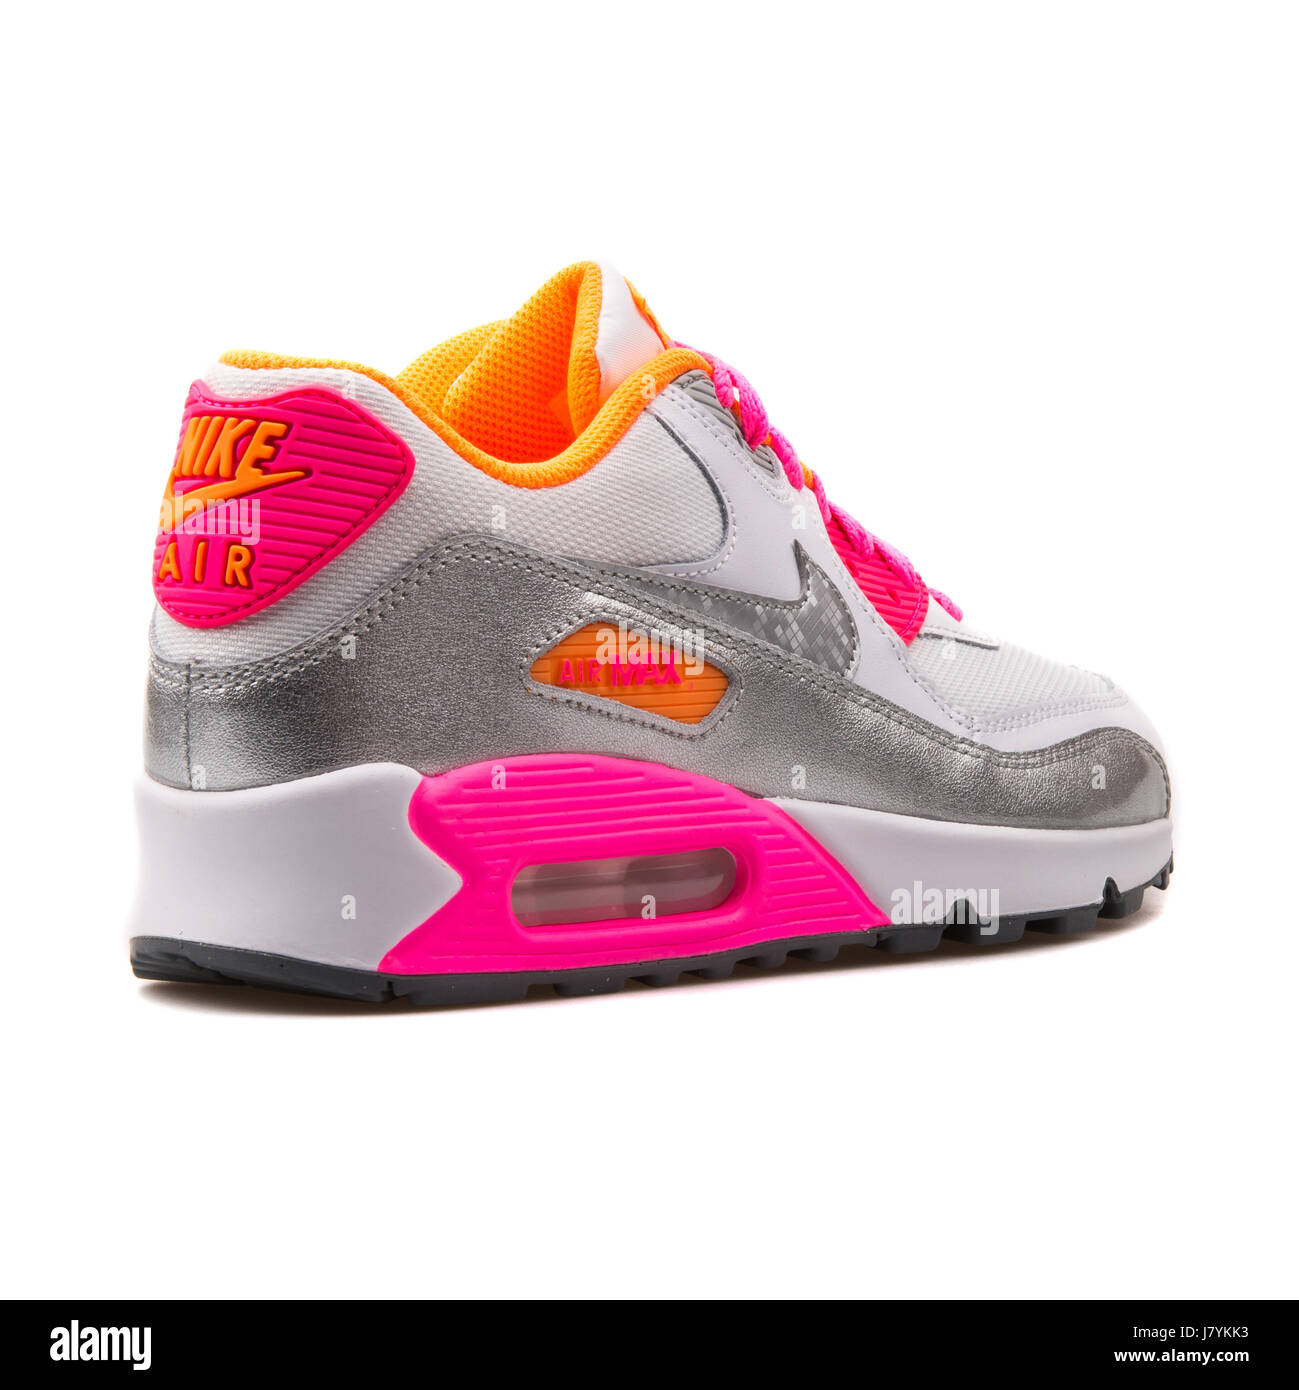 Nike Air Max 90 Mesh (GS) Youth White, Silver and Pink Running Sneakers -  724855-101 Stock Photo - Alamy